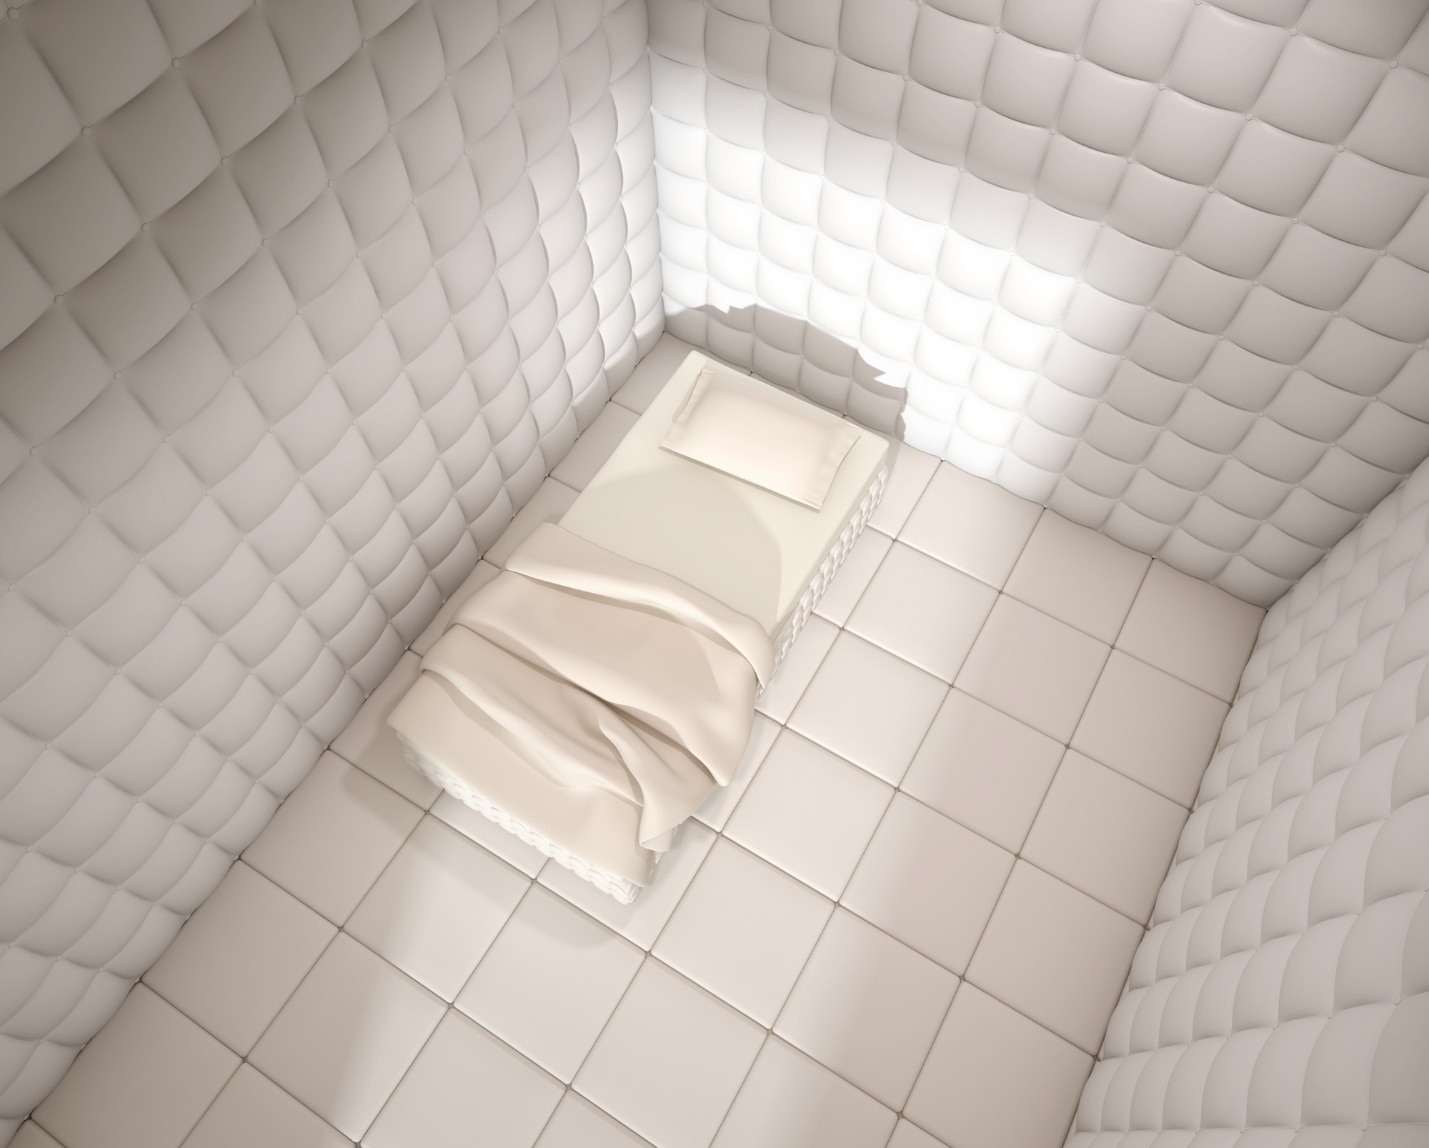 A picture containing indoor, white, tiled, toilet

Description automatically generated